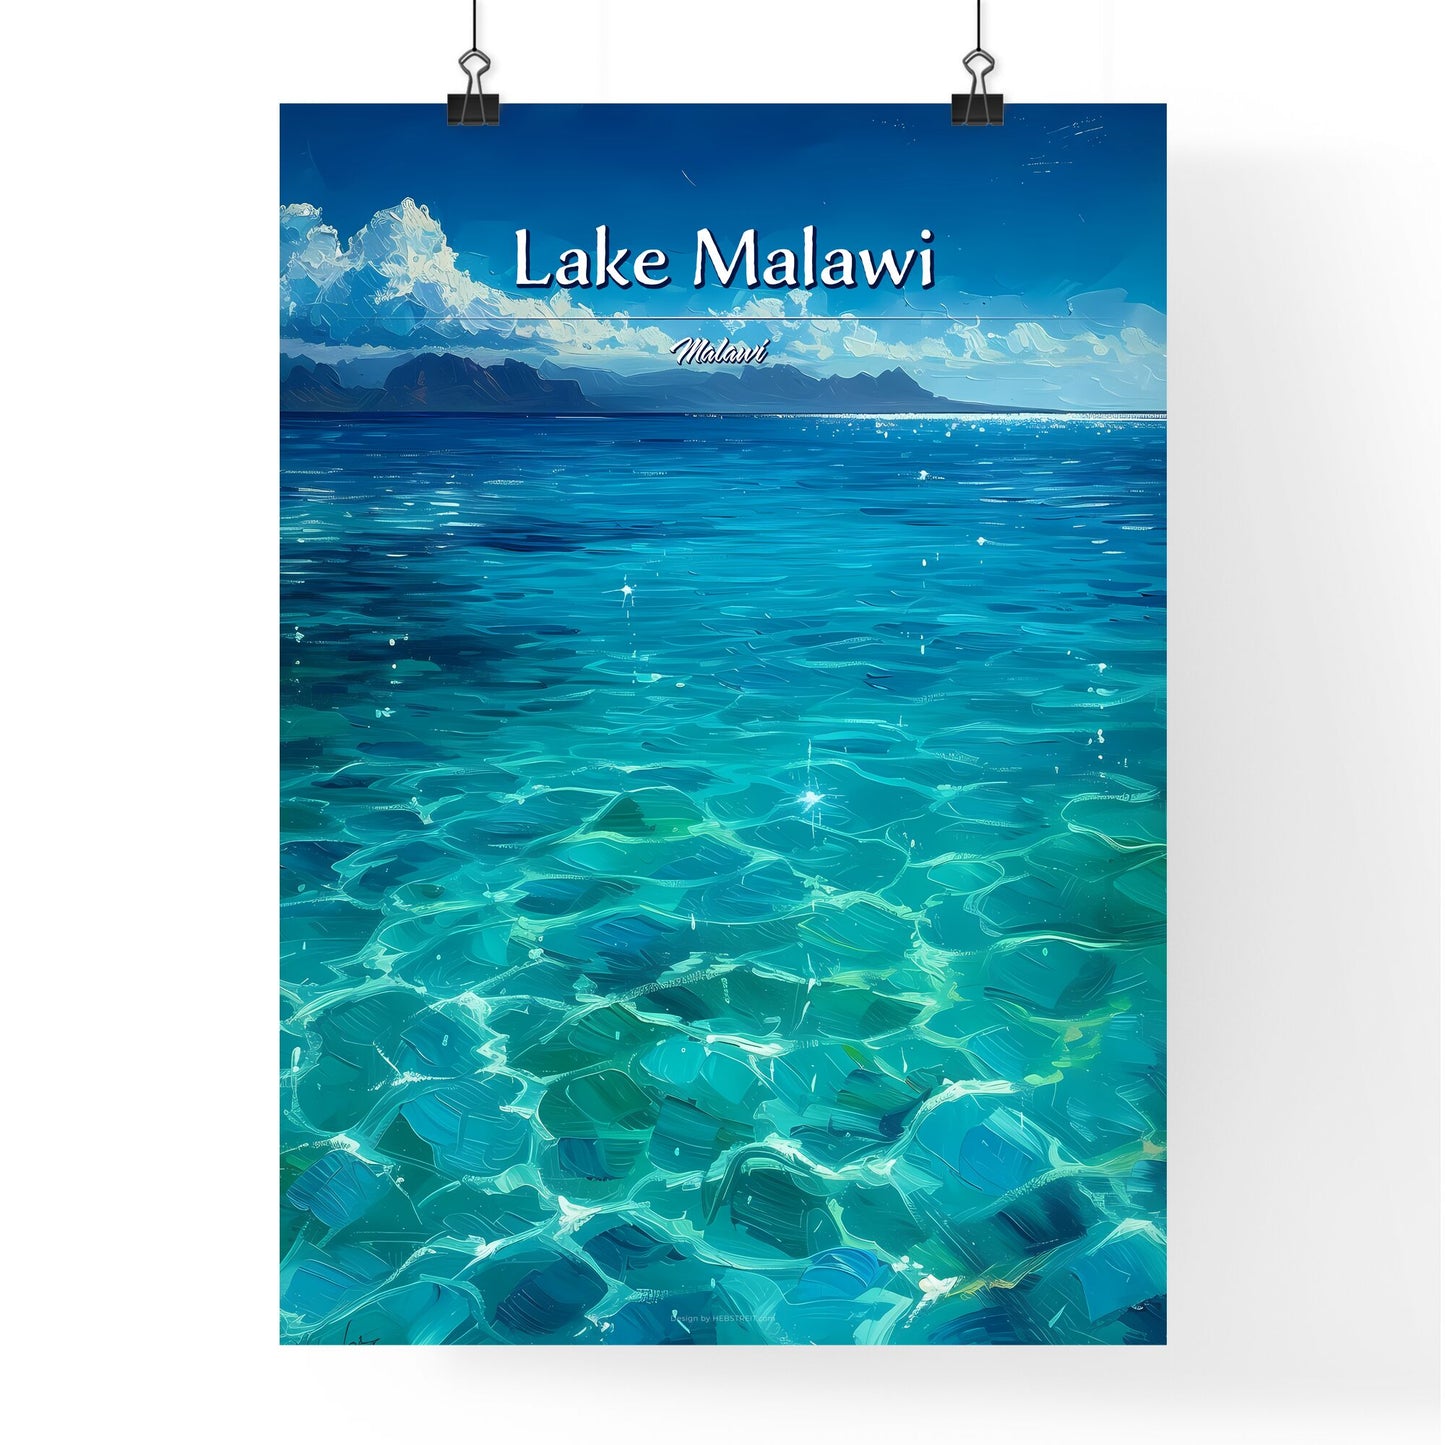 Lake Malawi, Malawi - Art print of a blue water with mountains in the background Default Title